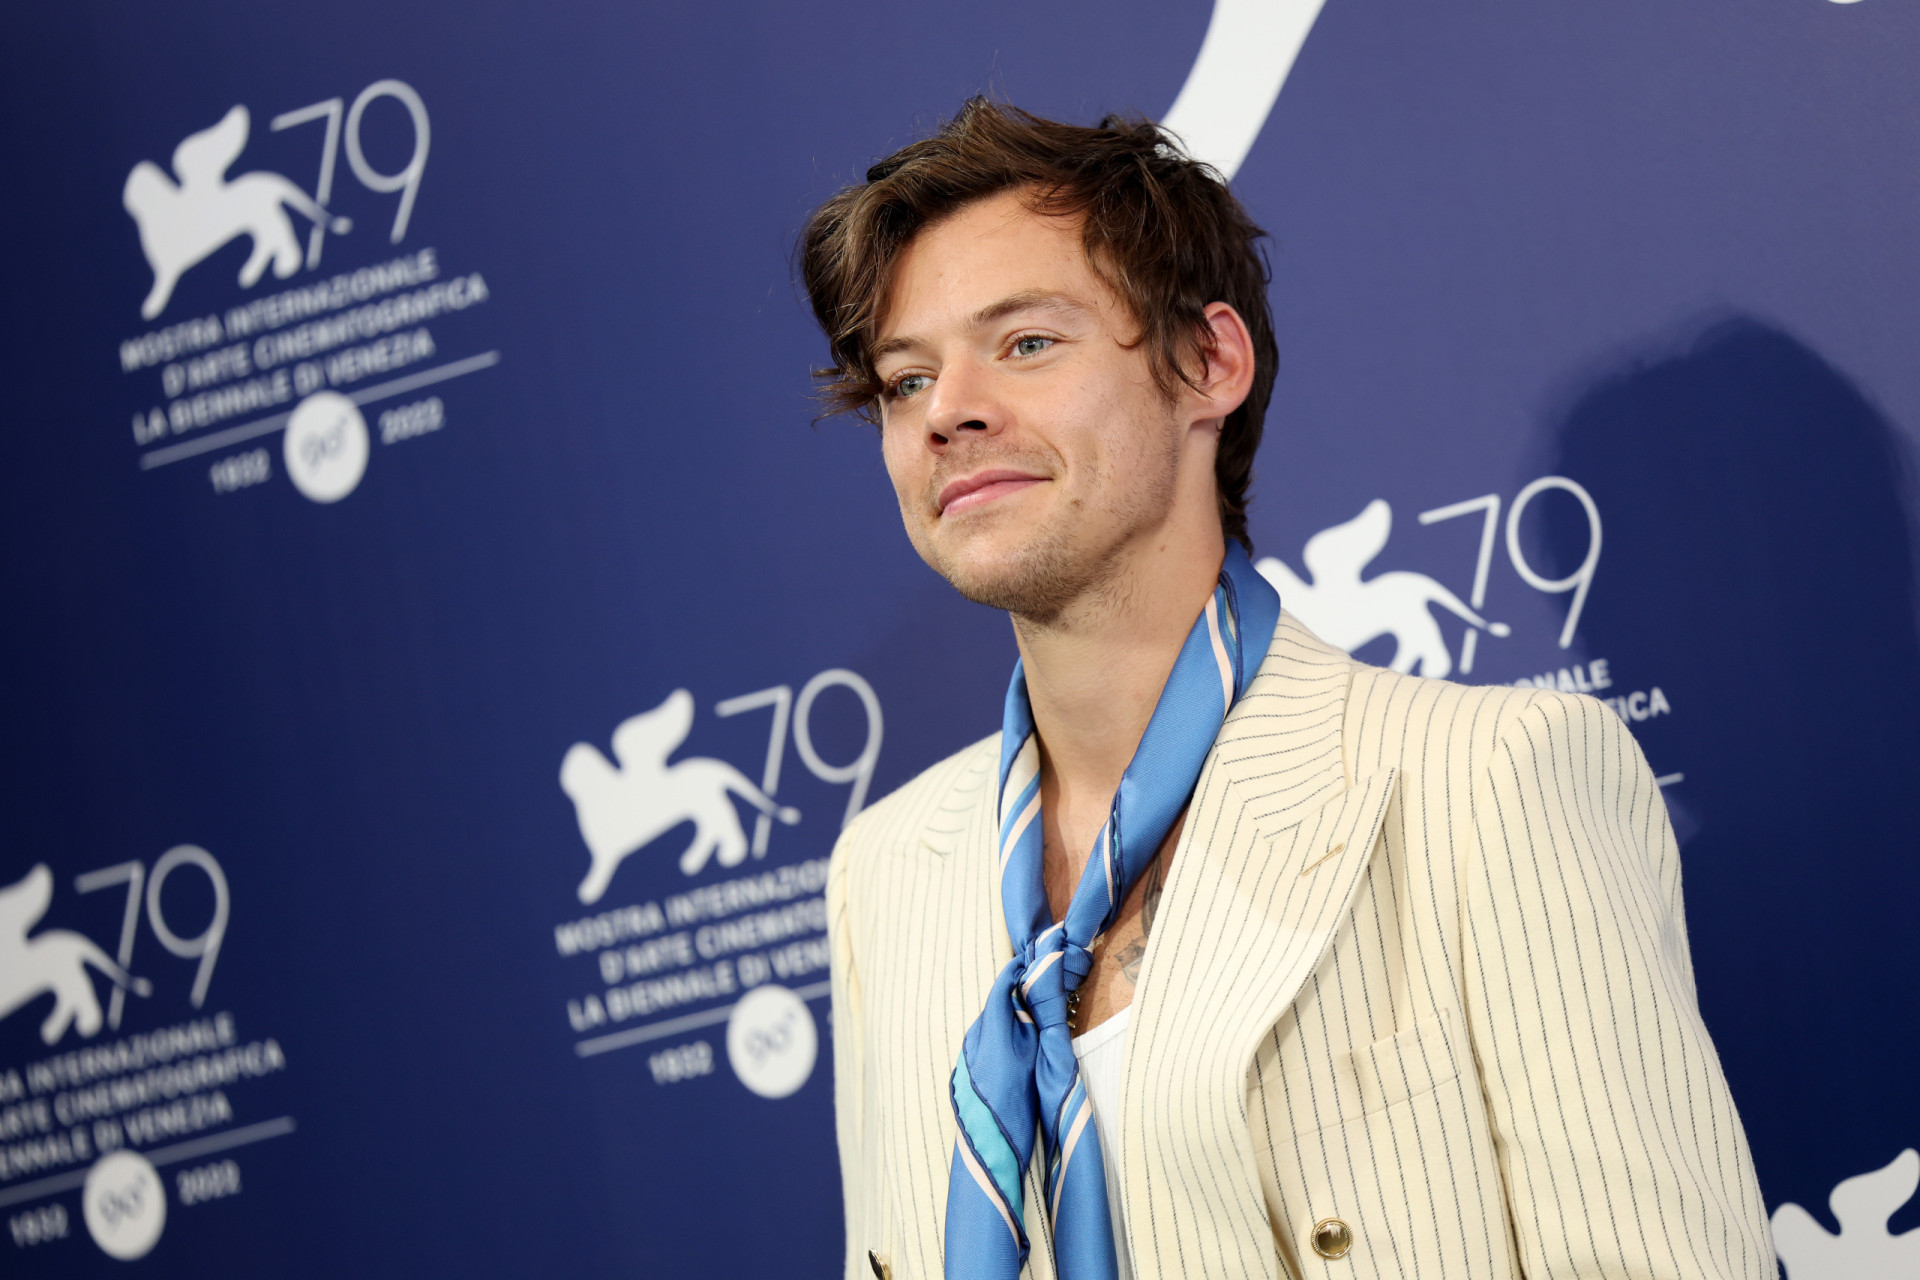 <p><a title="The style evolution of Harry Styles" href="https://www.starsinsider.com/celebrity/454076/the-style-evolution-of-harry-styles" rel="noopener">Harry Styles</a>' tarot cards, tied to his Aquarius birth date, mirror his charming quirkiness and artistic evolution.</p><p><a href="https://www.msn.com/en-us/community/channel/vid-7xx8mnucu55yw63we9va2gwr7uihbxwc68fxqp25x6tg4ftibpra?cvid=94631541bc0f4f89bfd59158d696ad7e">Follow us and access great exclusive content every day</a></p>